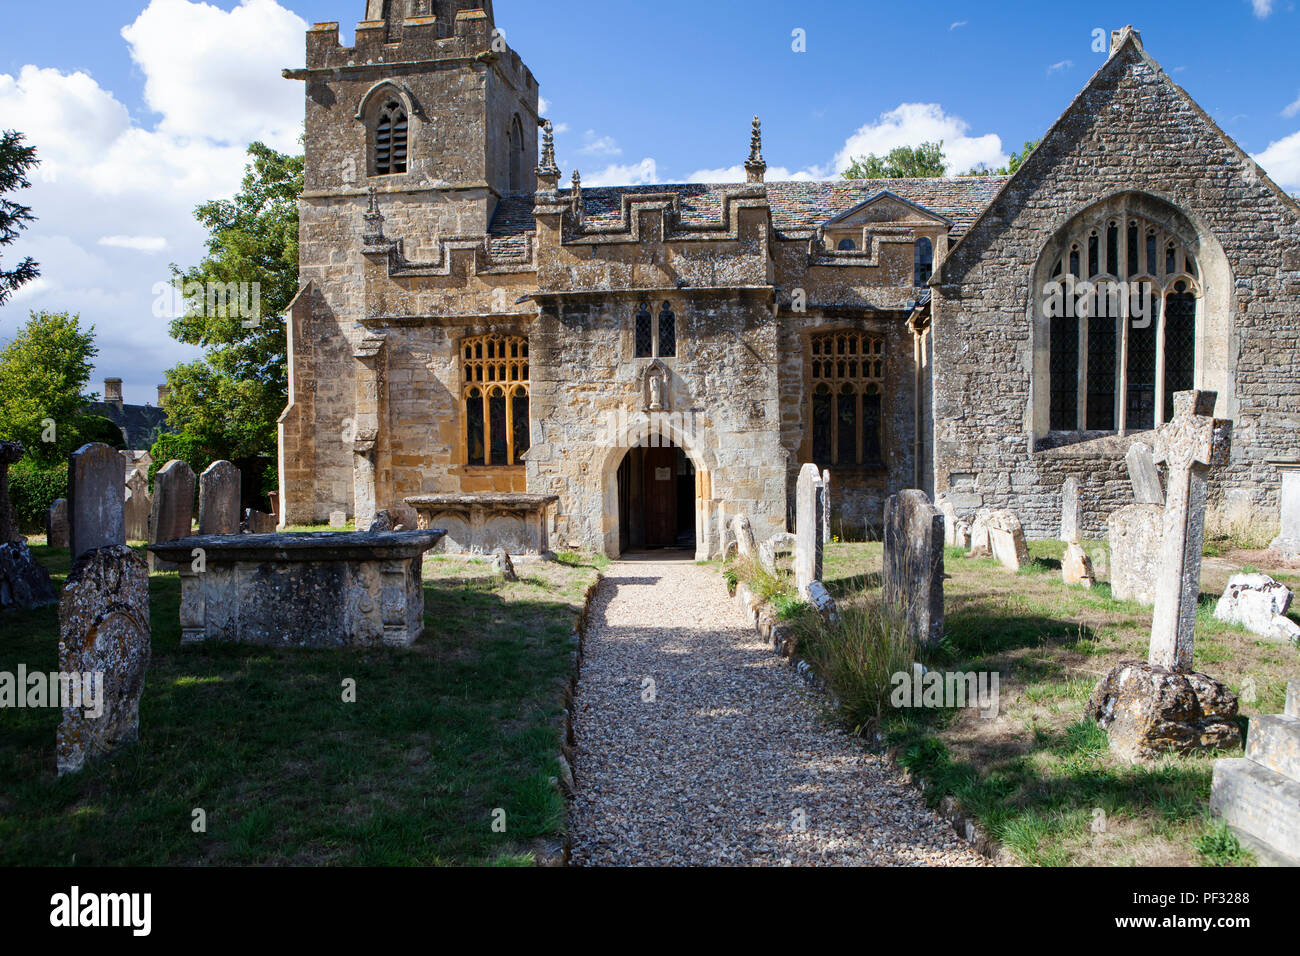 Stanton, UK - 8th August 2018: The Church of St Michael and All Angels in Stanton in the Cotswold district of Gloucestershire.The village is built alm Stock Photo